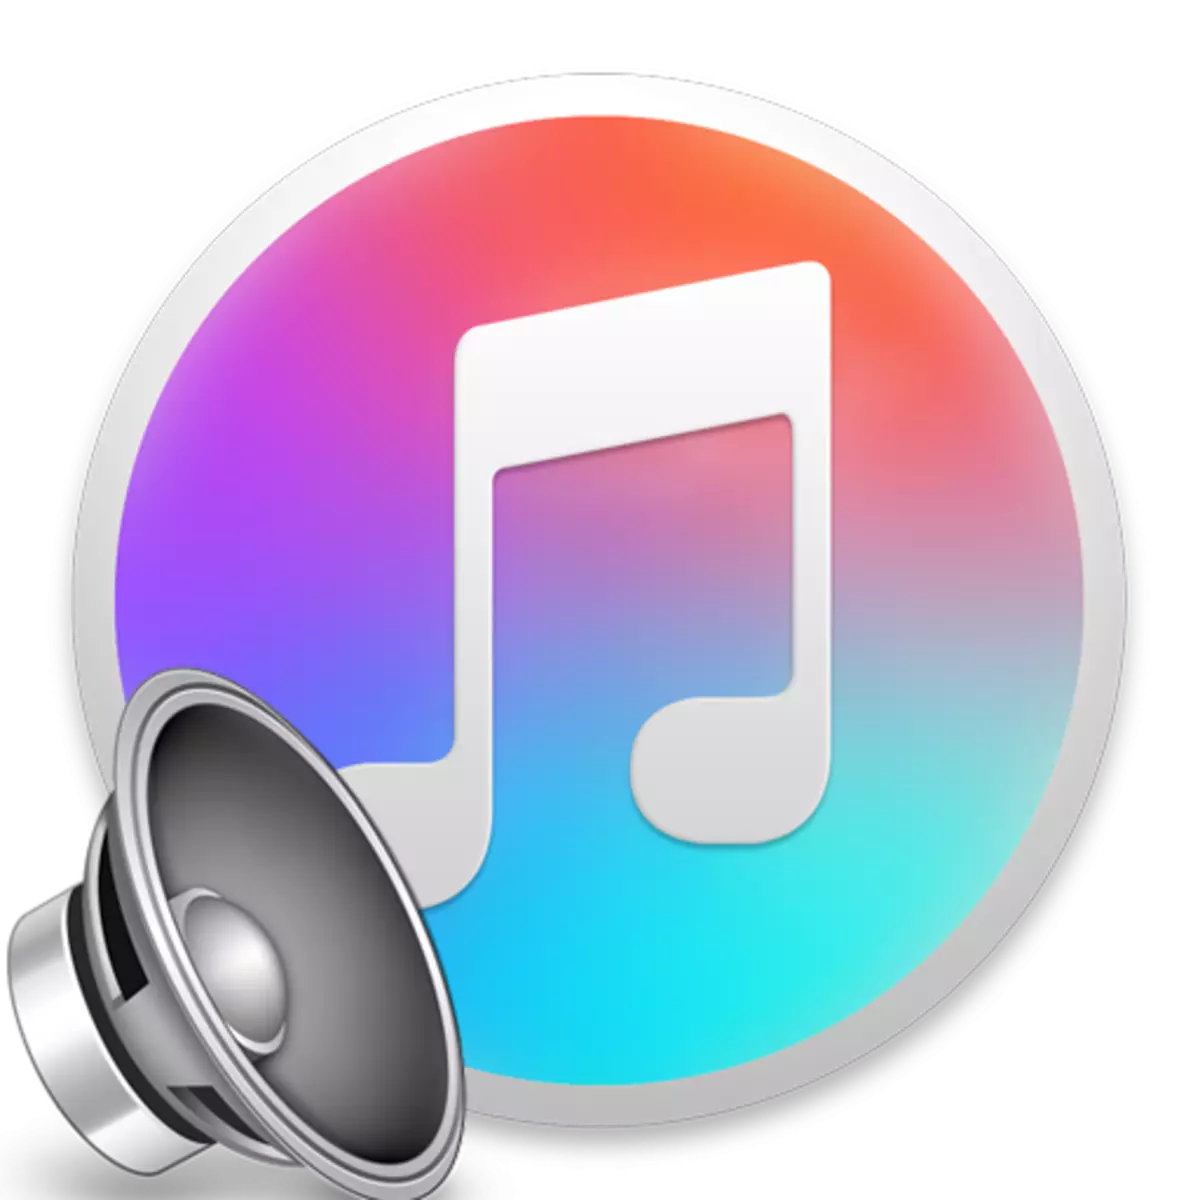 How to create a ringtone on iPhone